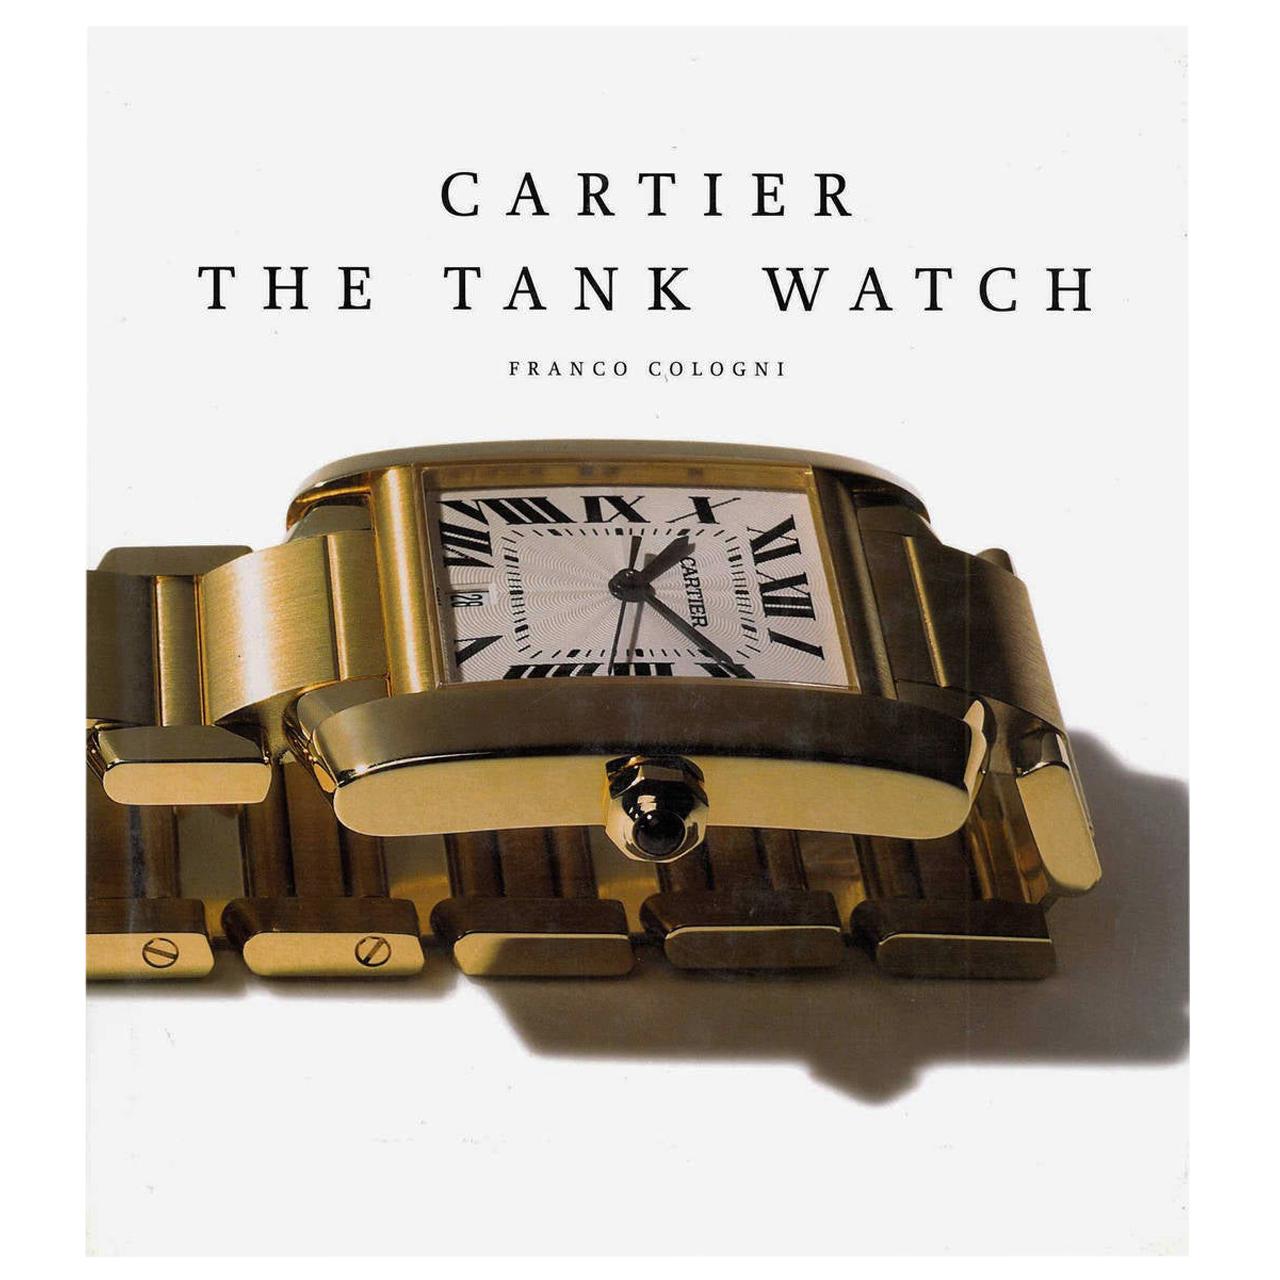 Cartier: The Tank Watch By Franco Cologni (Book)